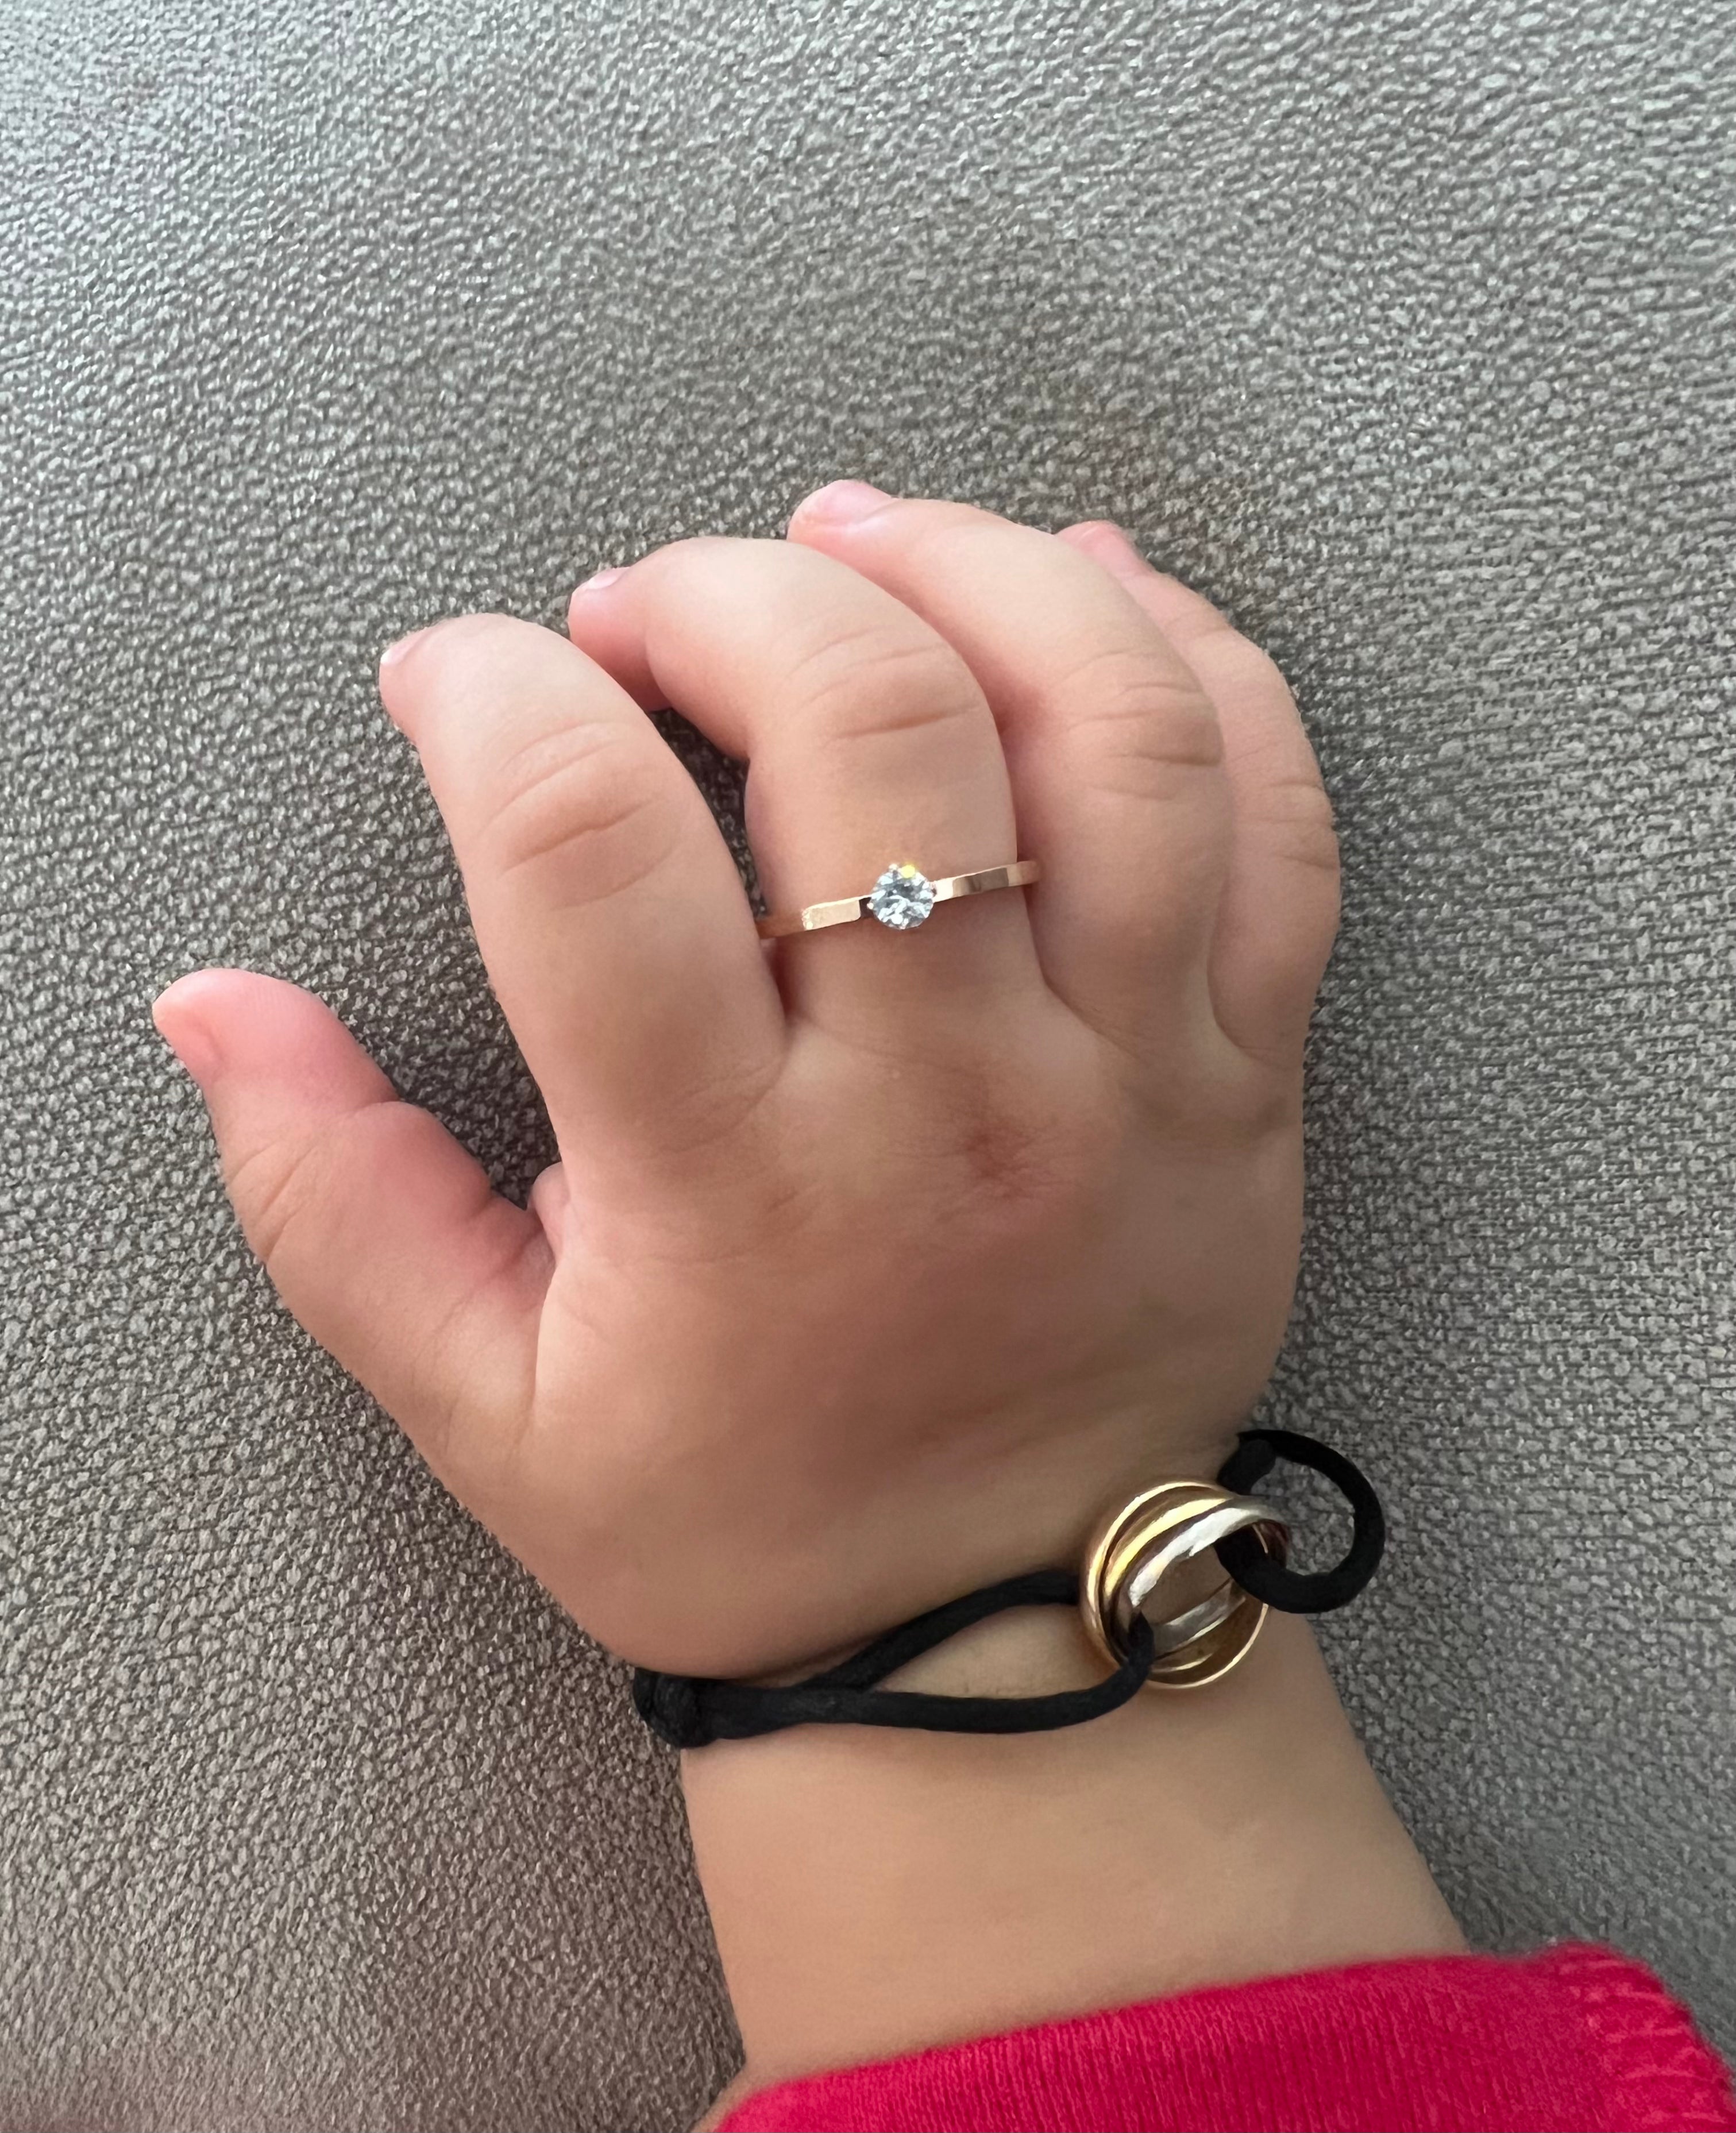 Baby ring( up to 1 year and half )